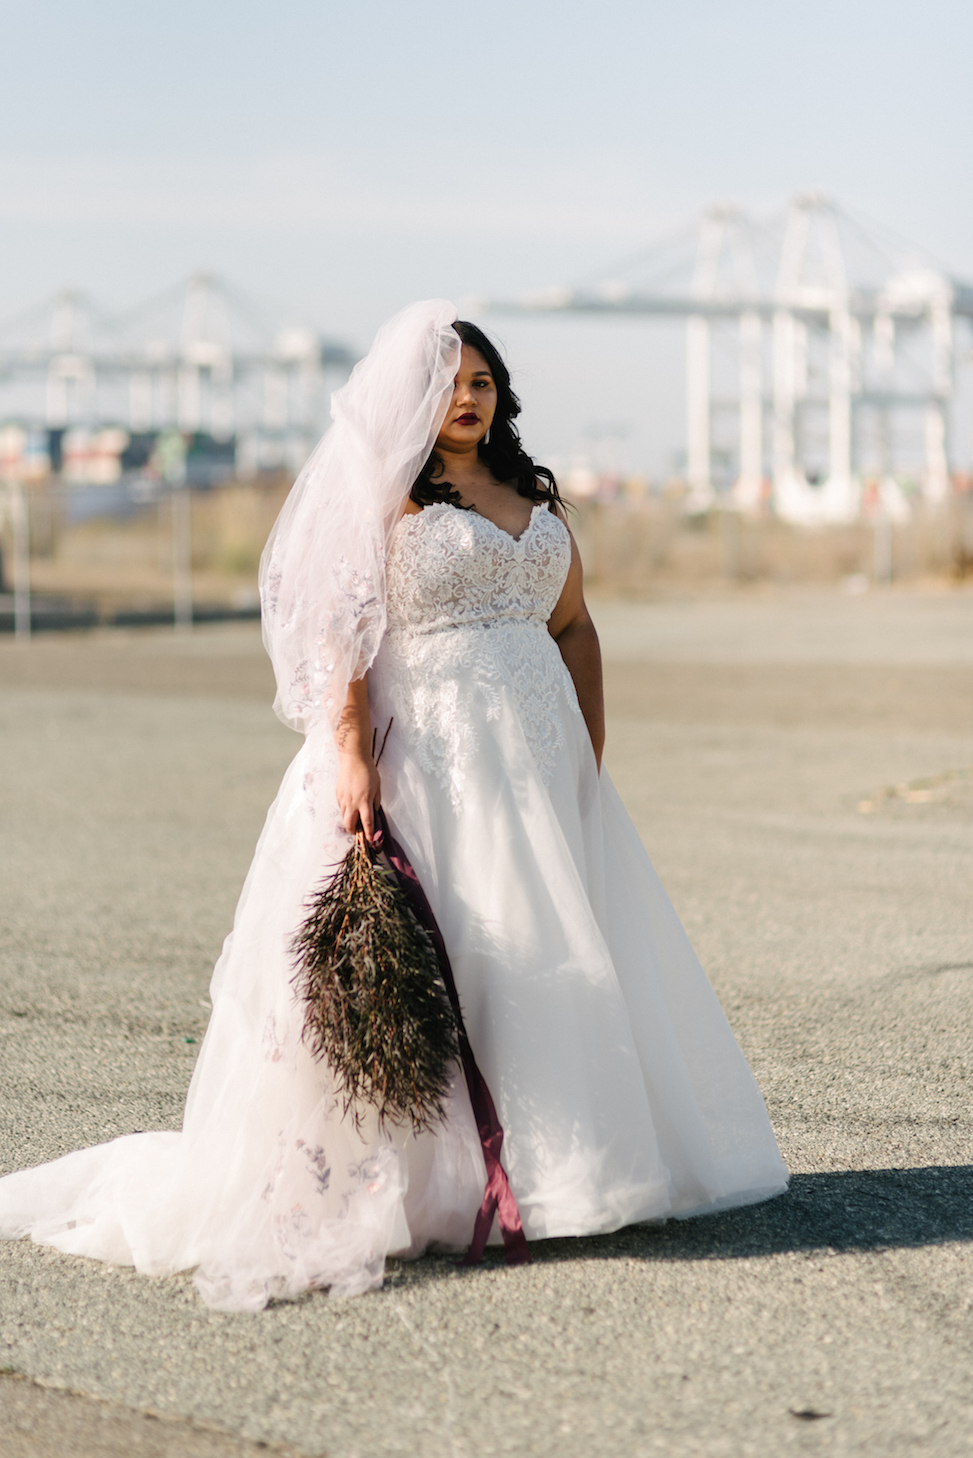 A women wears Maggie Sottero dress style 'Vanessa' with a veil and a bouquet.